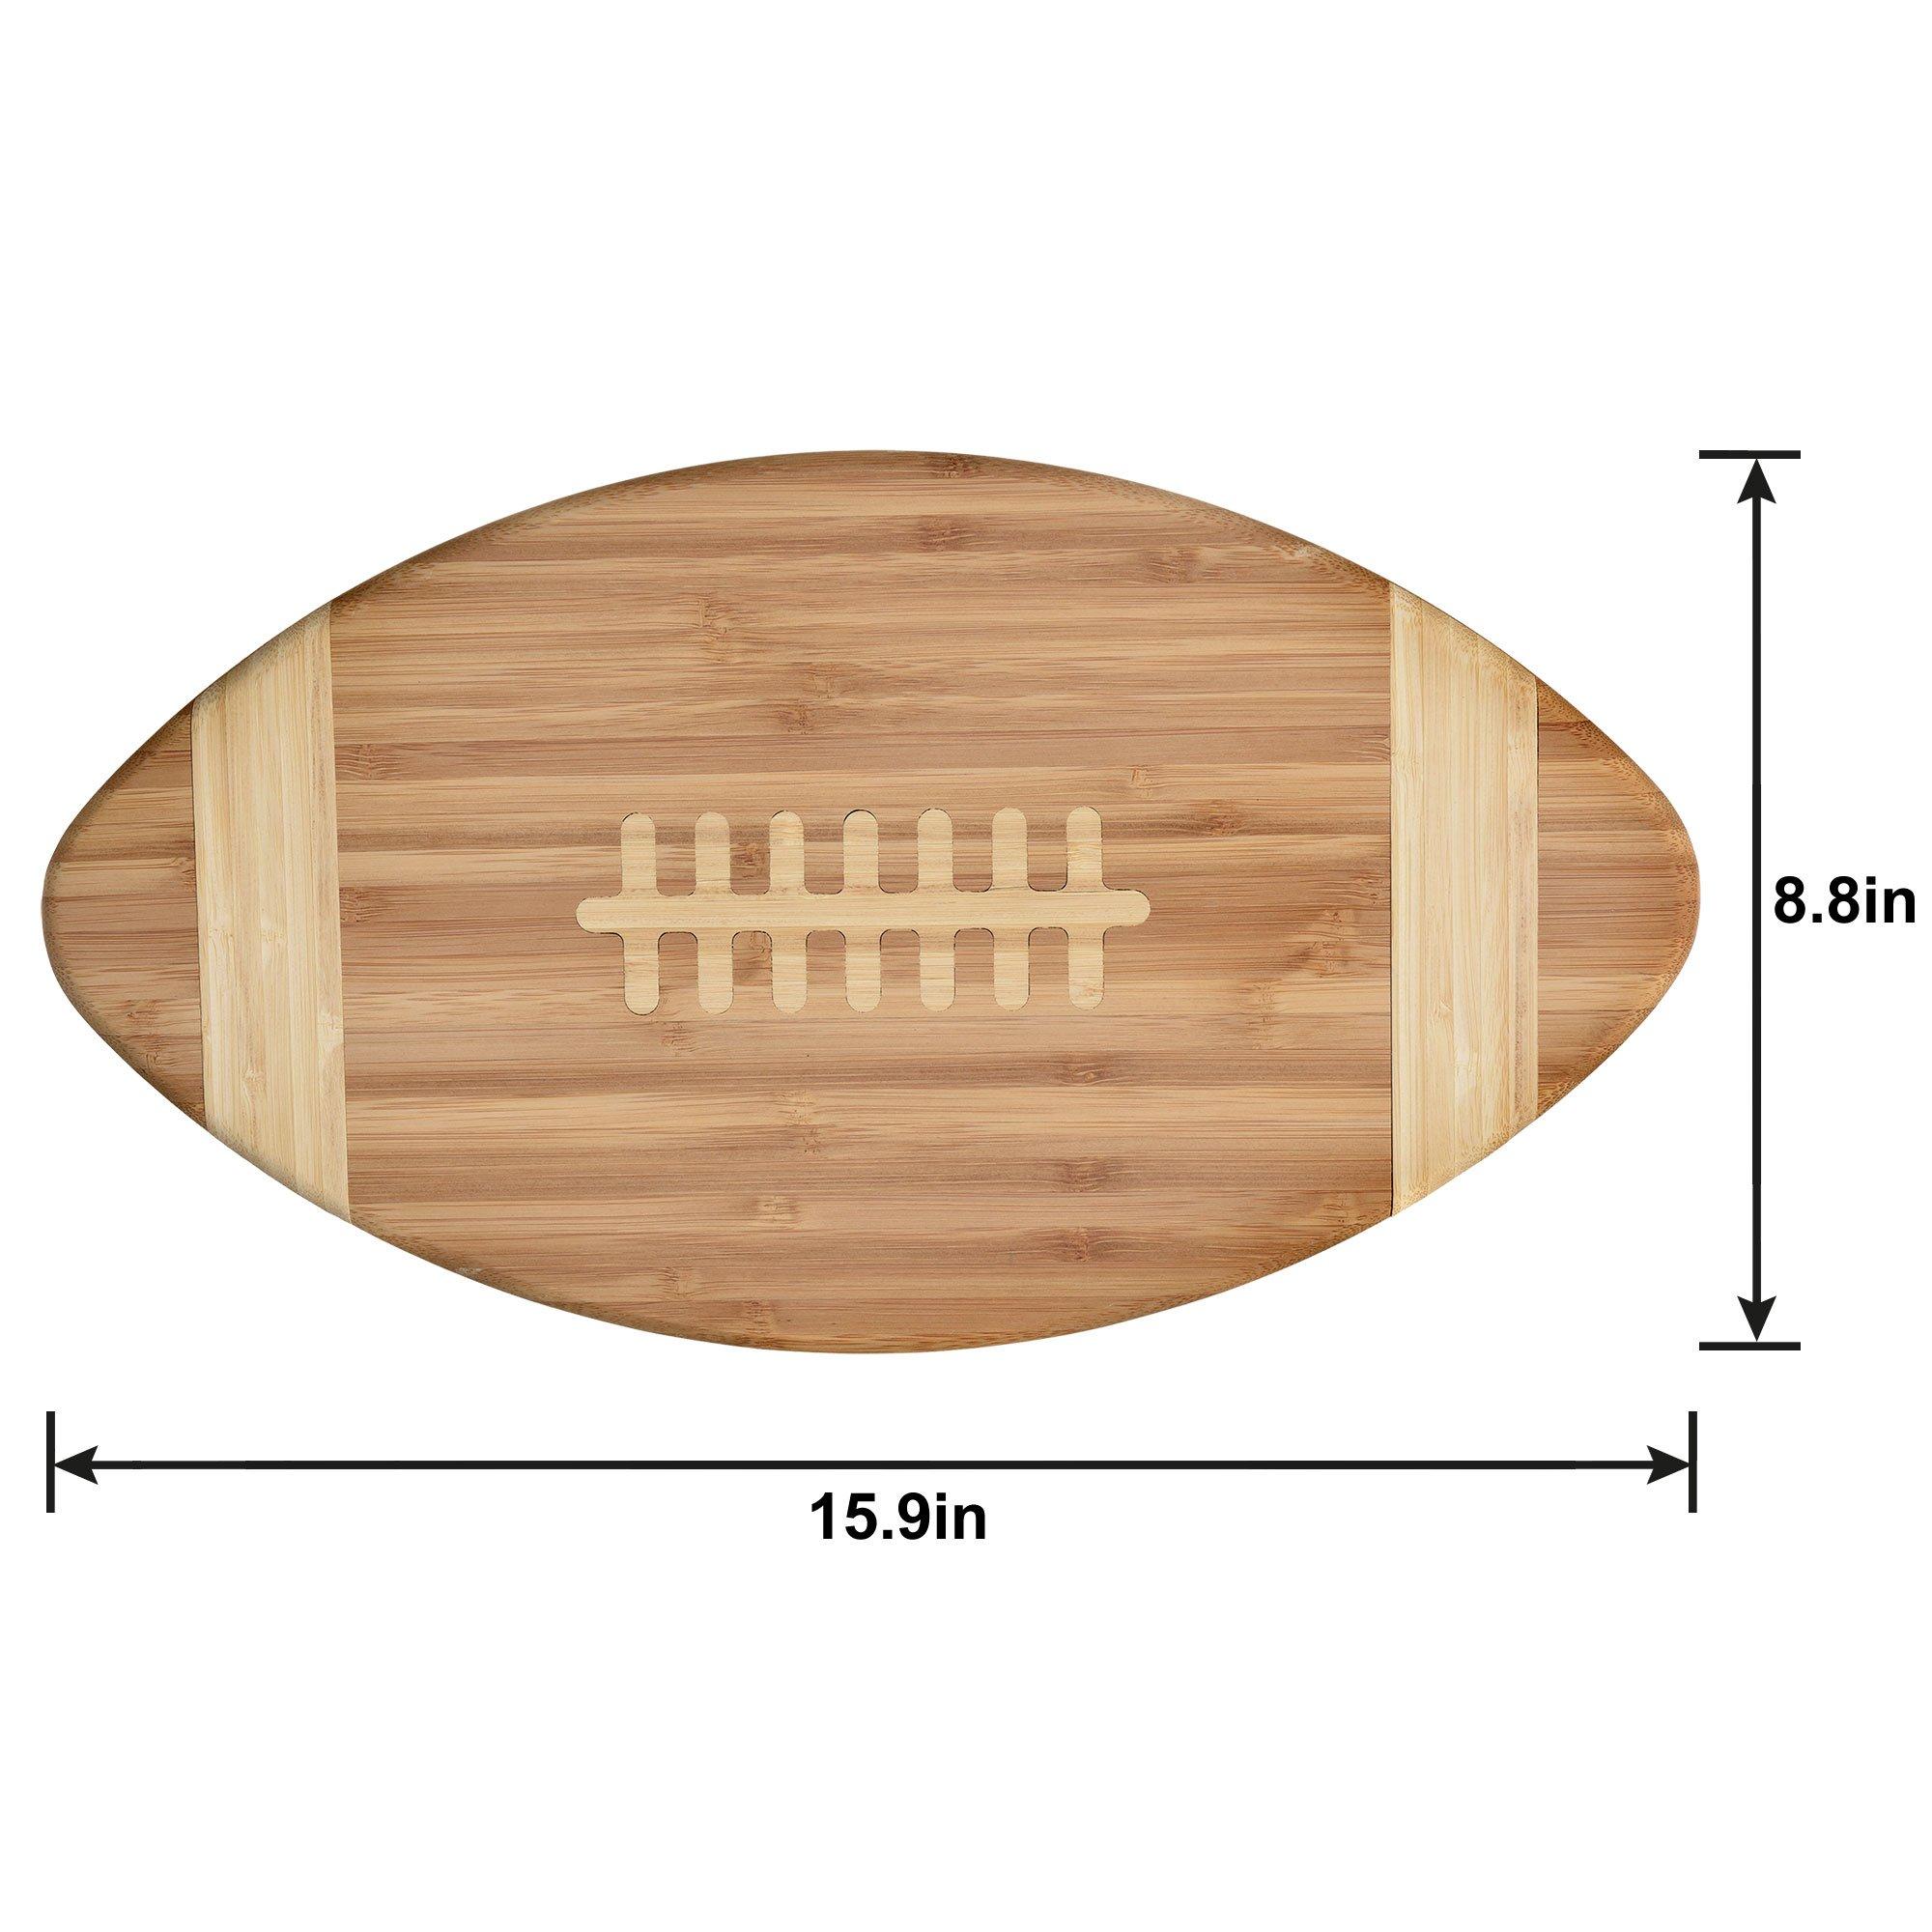 Football-Shaped Bamboo Platter, 8.8in x 15.9in